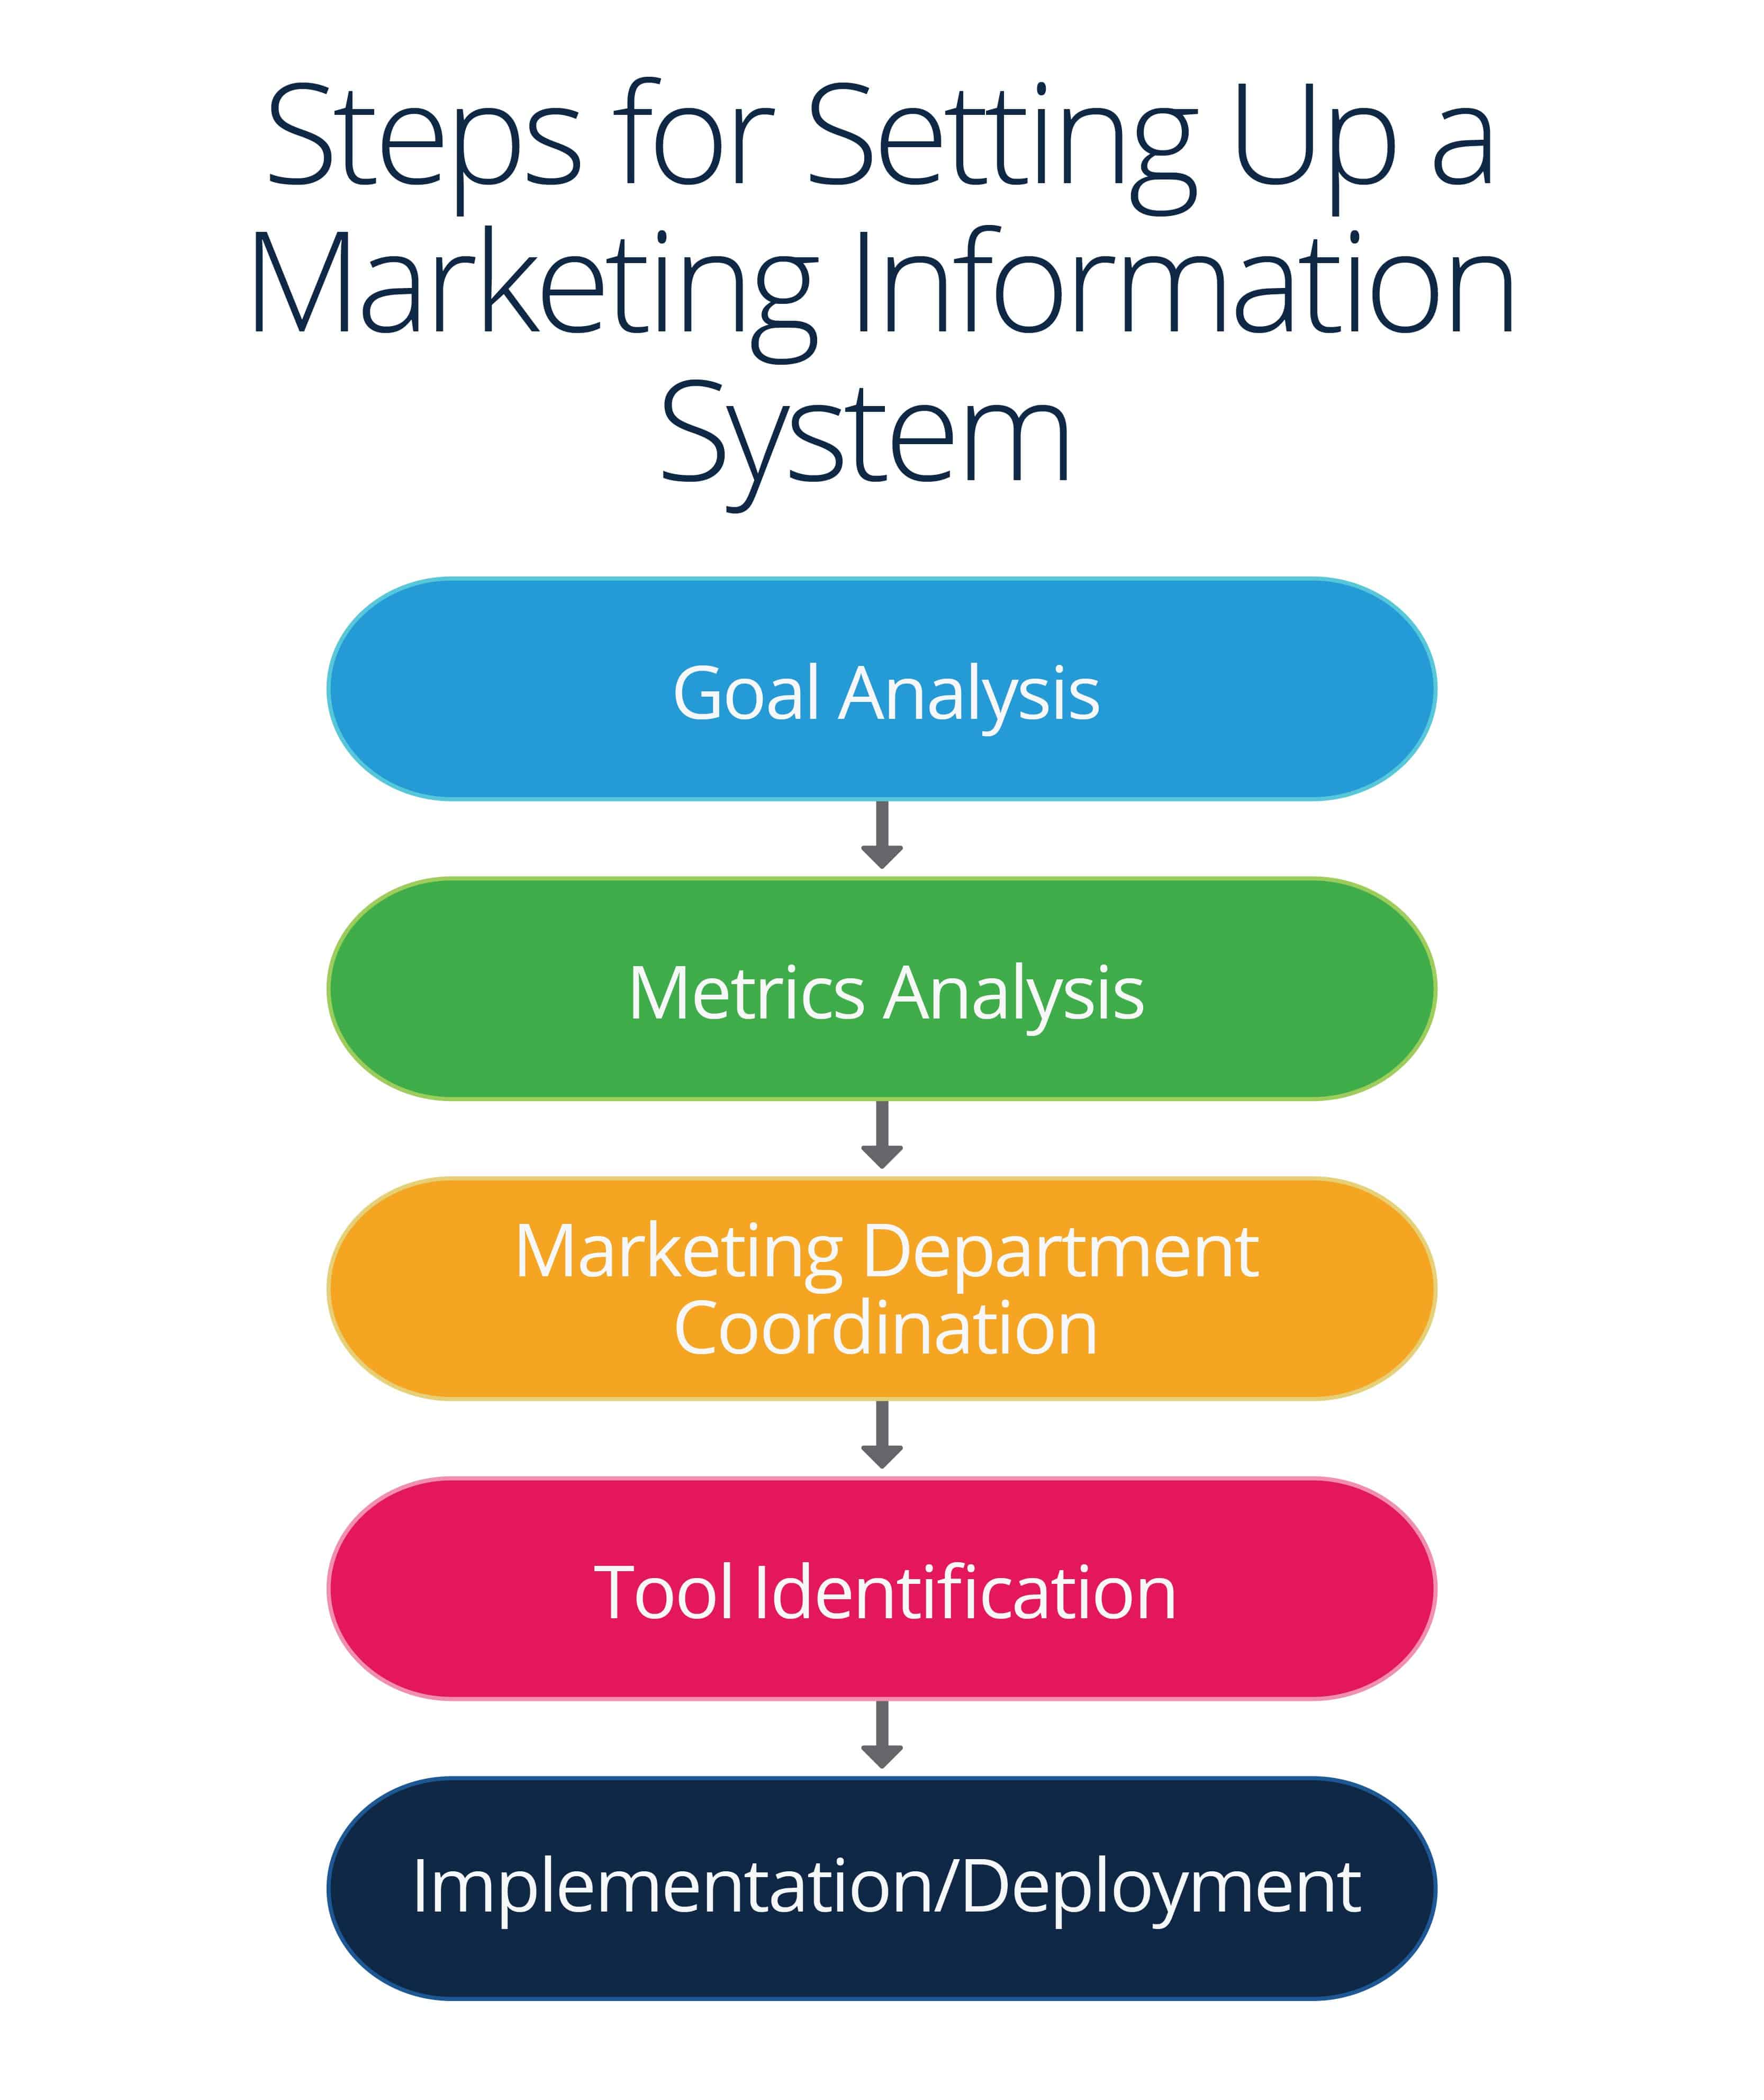 role of marketing research in marketing information system